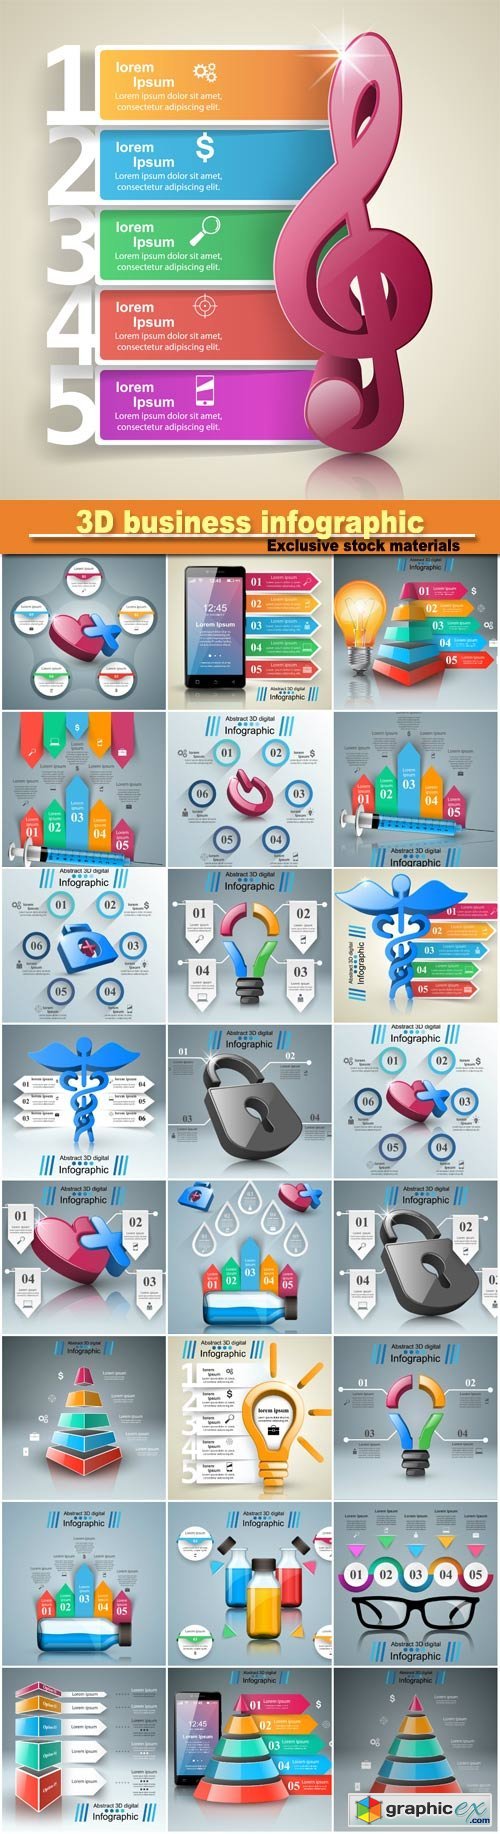 3D business infographic design template and marketing icons, vector illustration